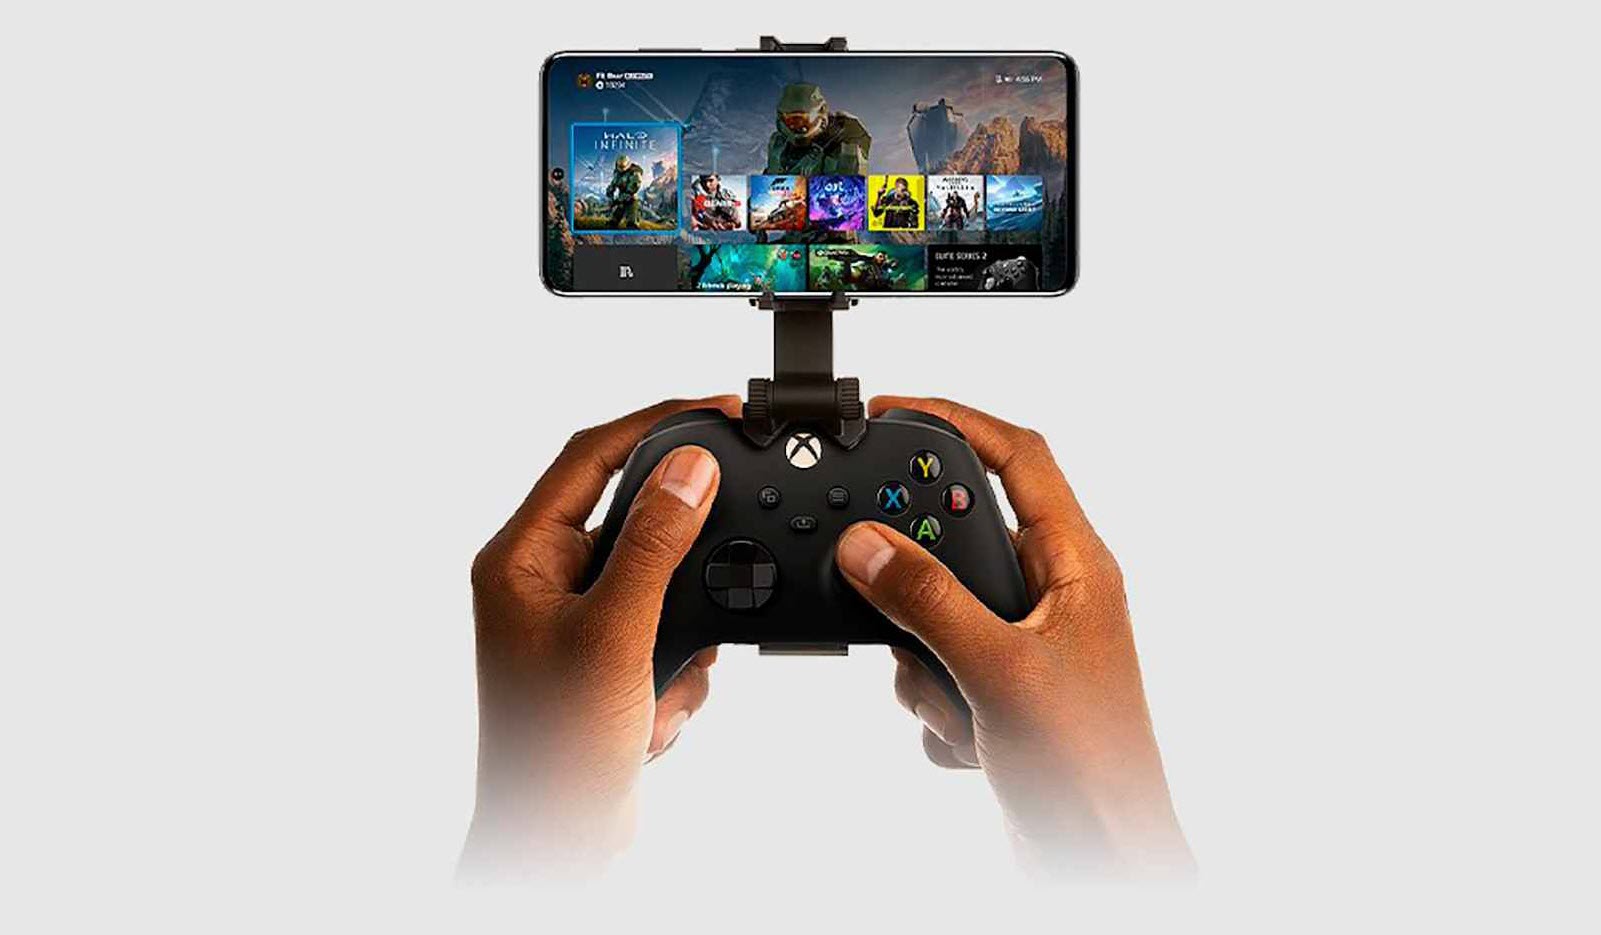 Xbox games on your Android